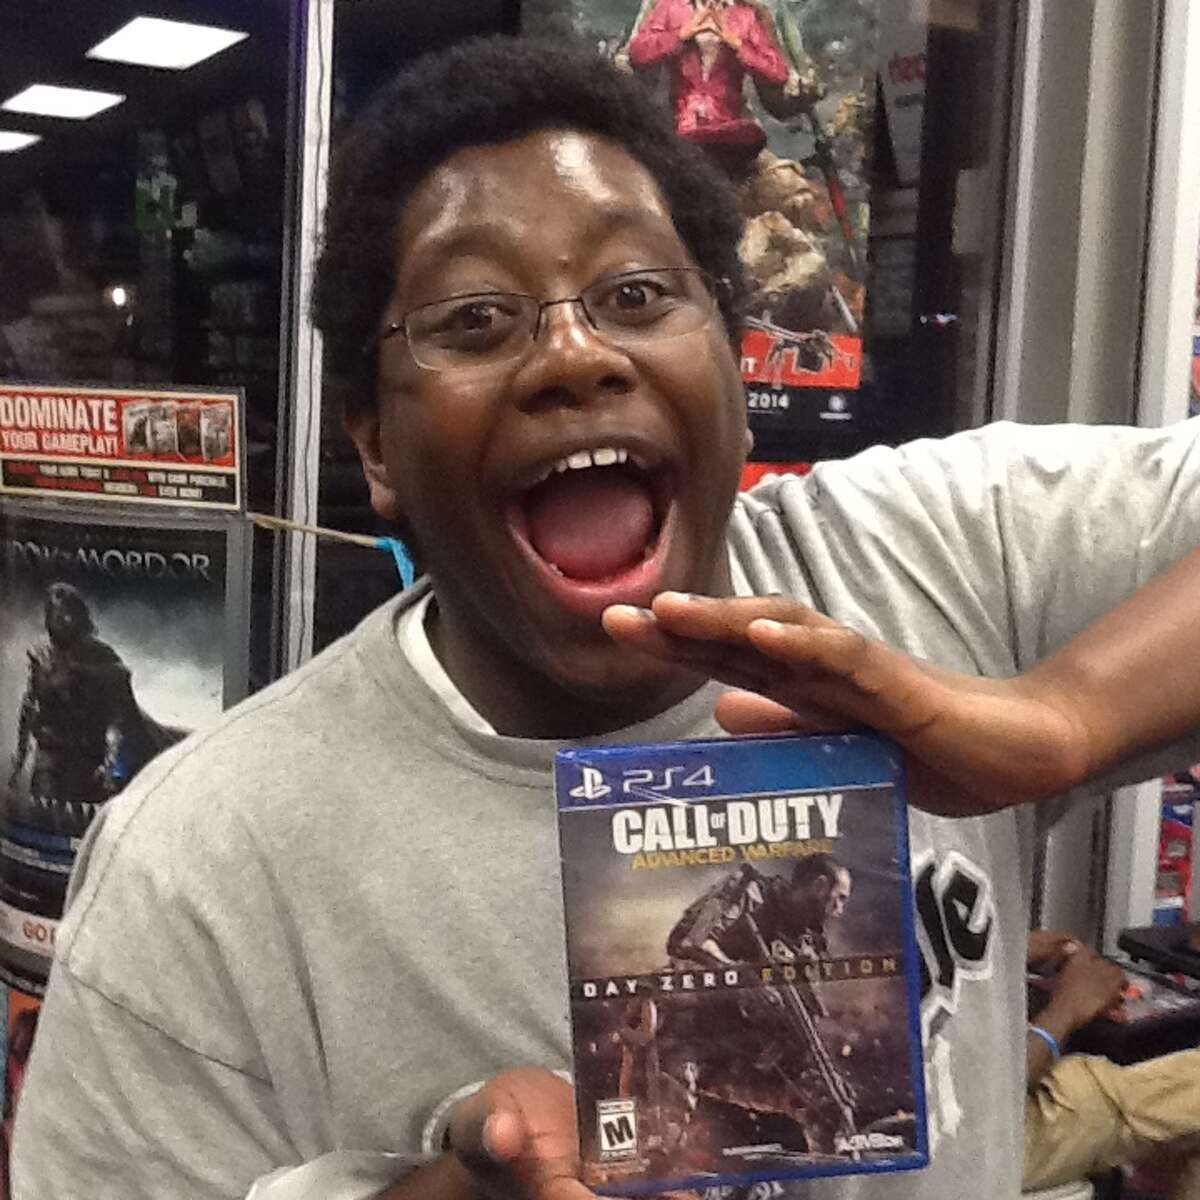 Call of Duty faithful hit GameStop locations all around San Antonio Sunday evening in a lighting quick raid at pre-order release events to pick up their copies of the new “Call of Duty: Advance Warfare.” These operatives and others like them across the U.S. will be the first wave of fans to play the game as it releases to the general public on Tuesday.